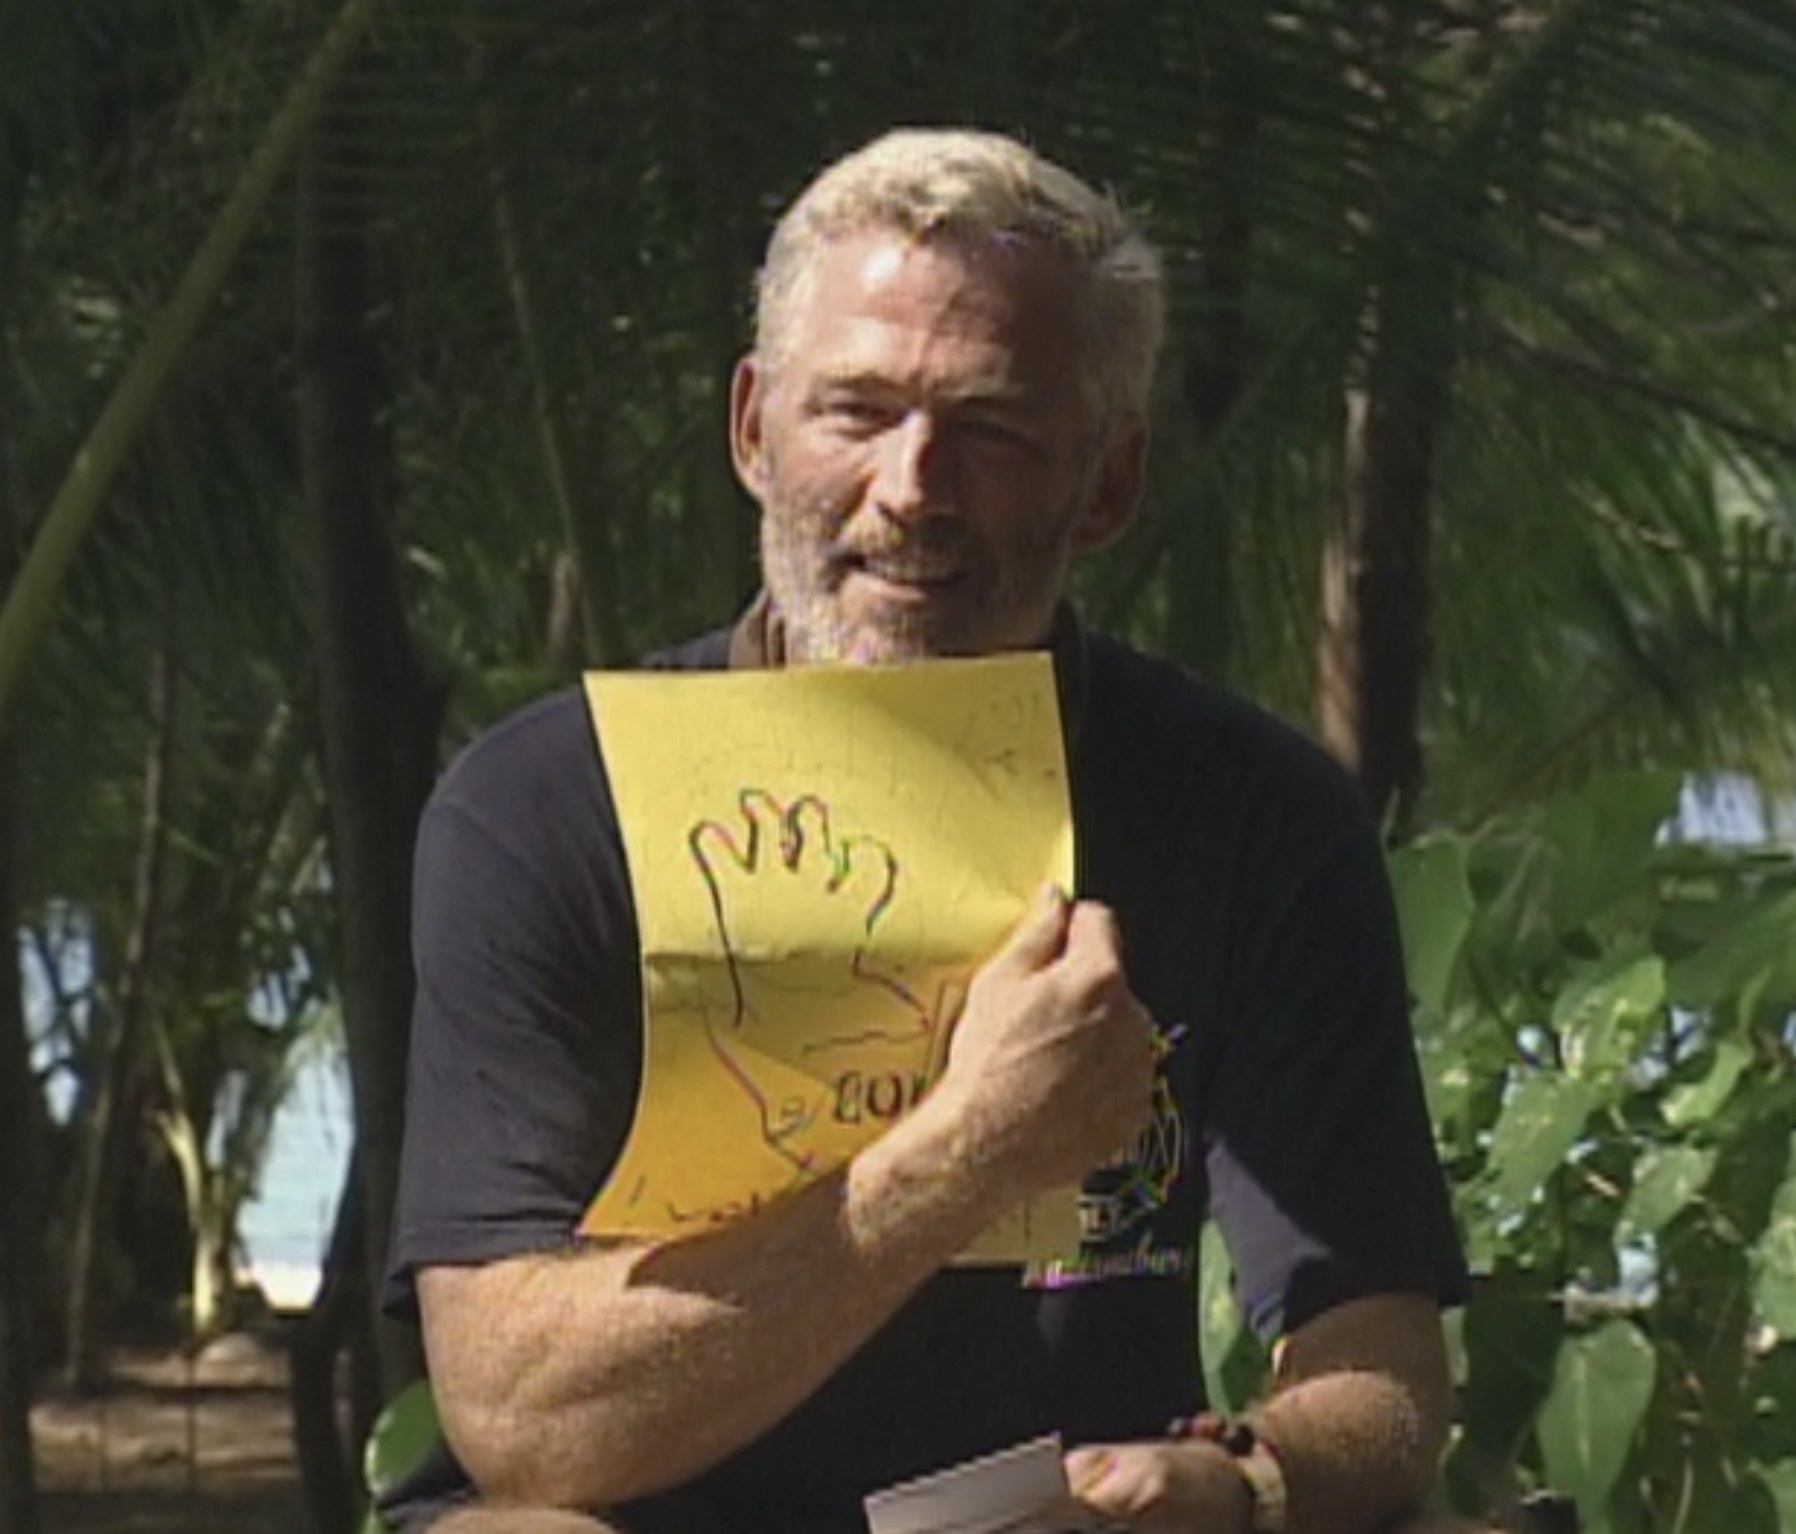 tom holding up a drawing done by his child on a yellow piece of paper